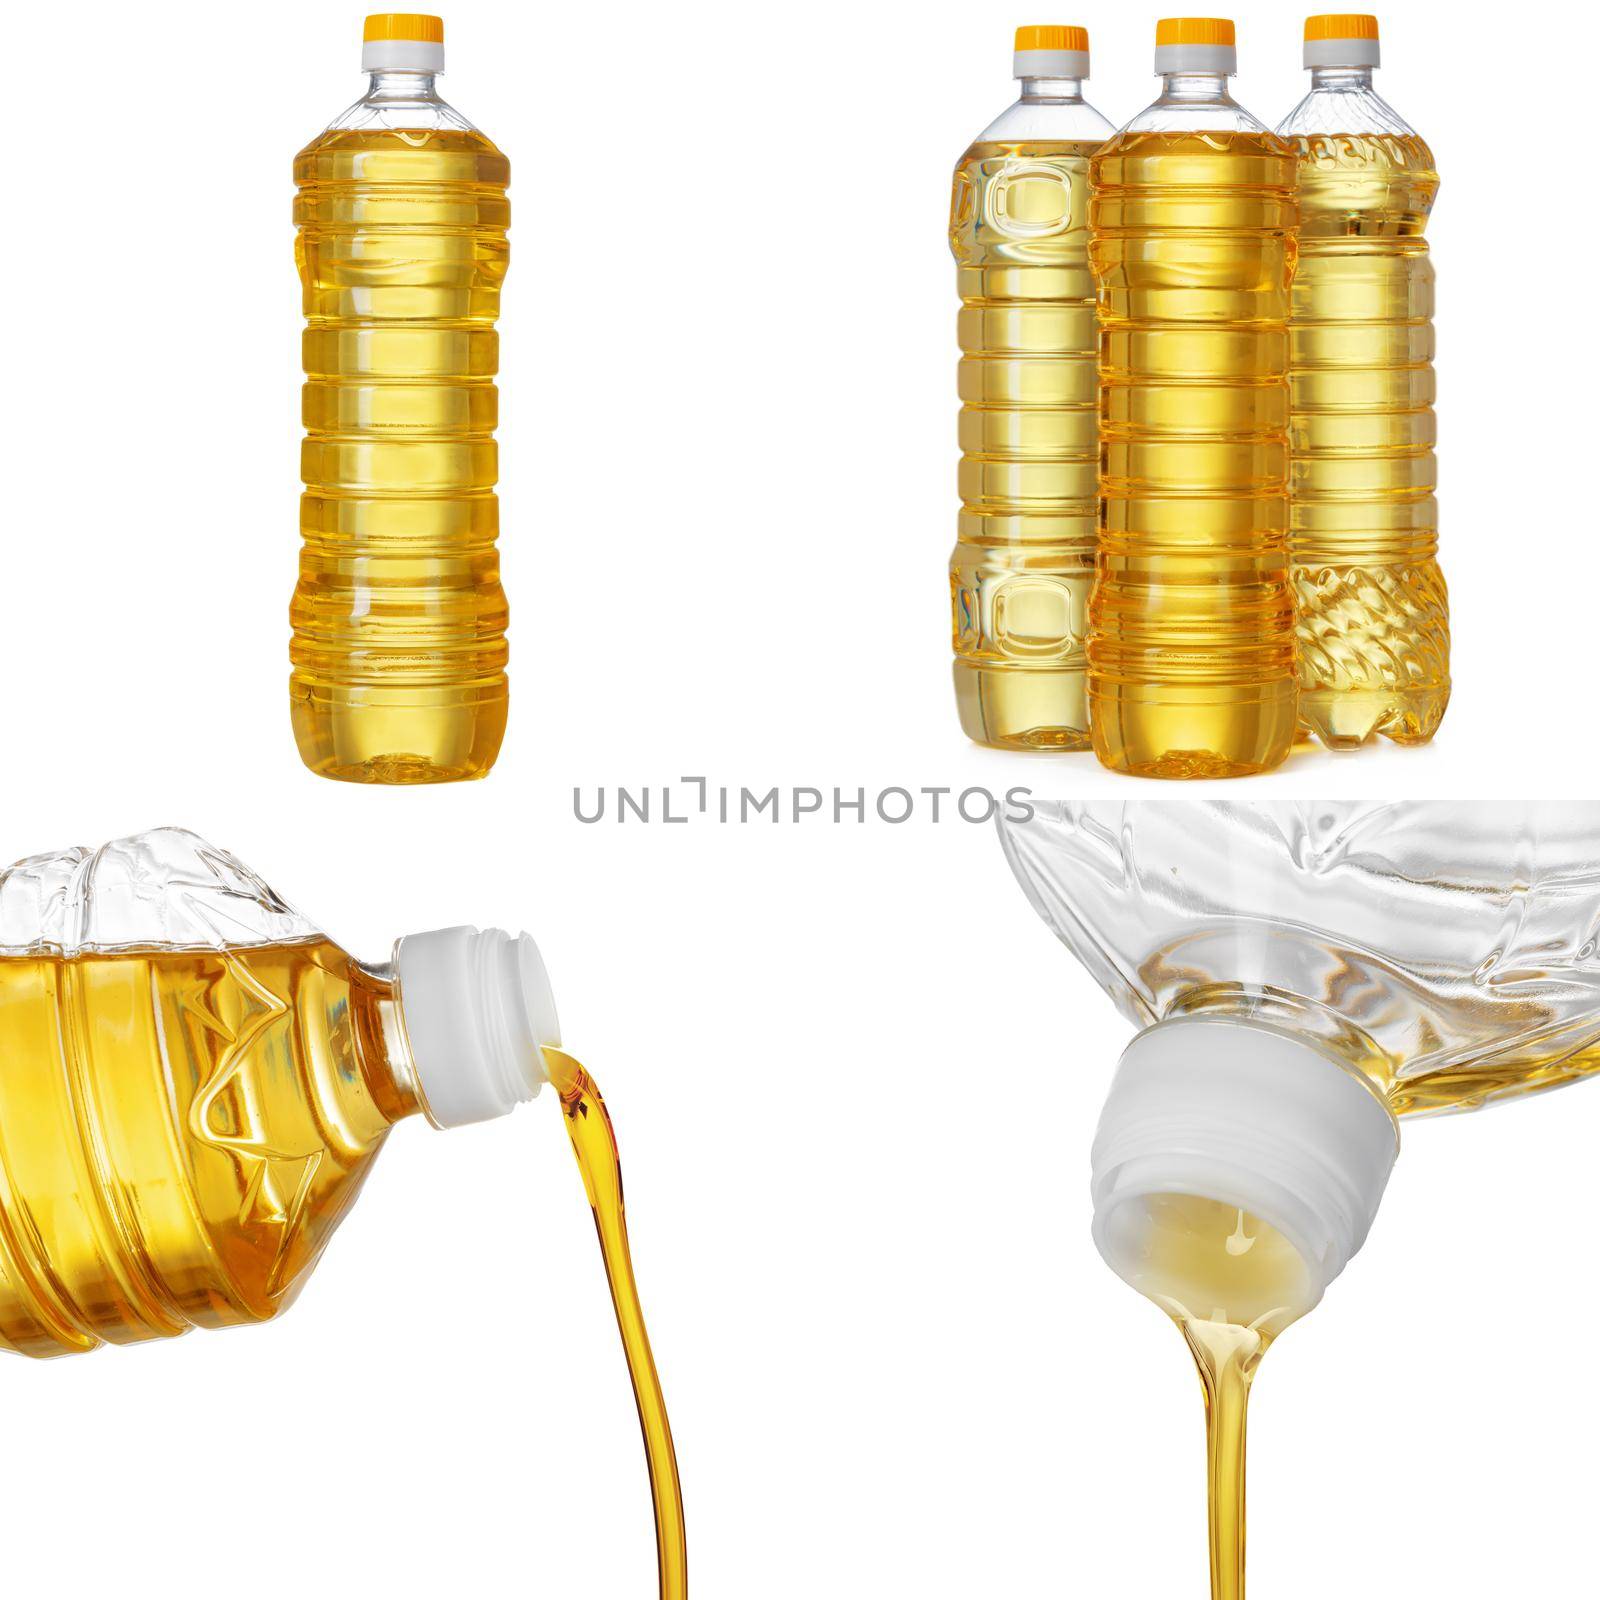 Sunflower oil bottles collage isolated on white background